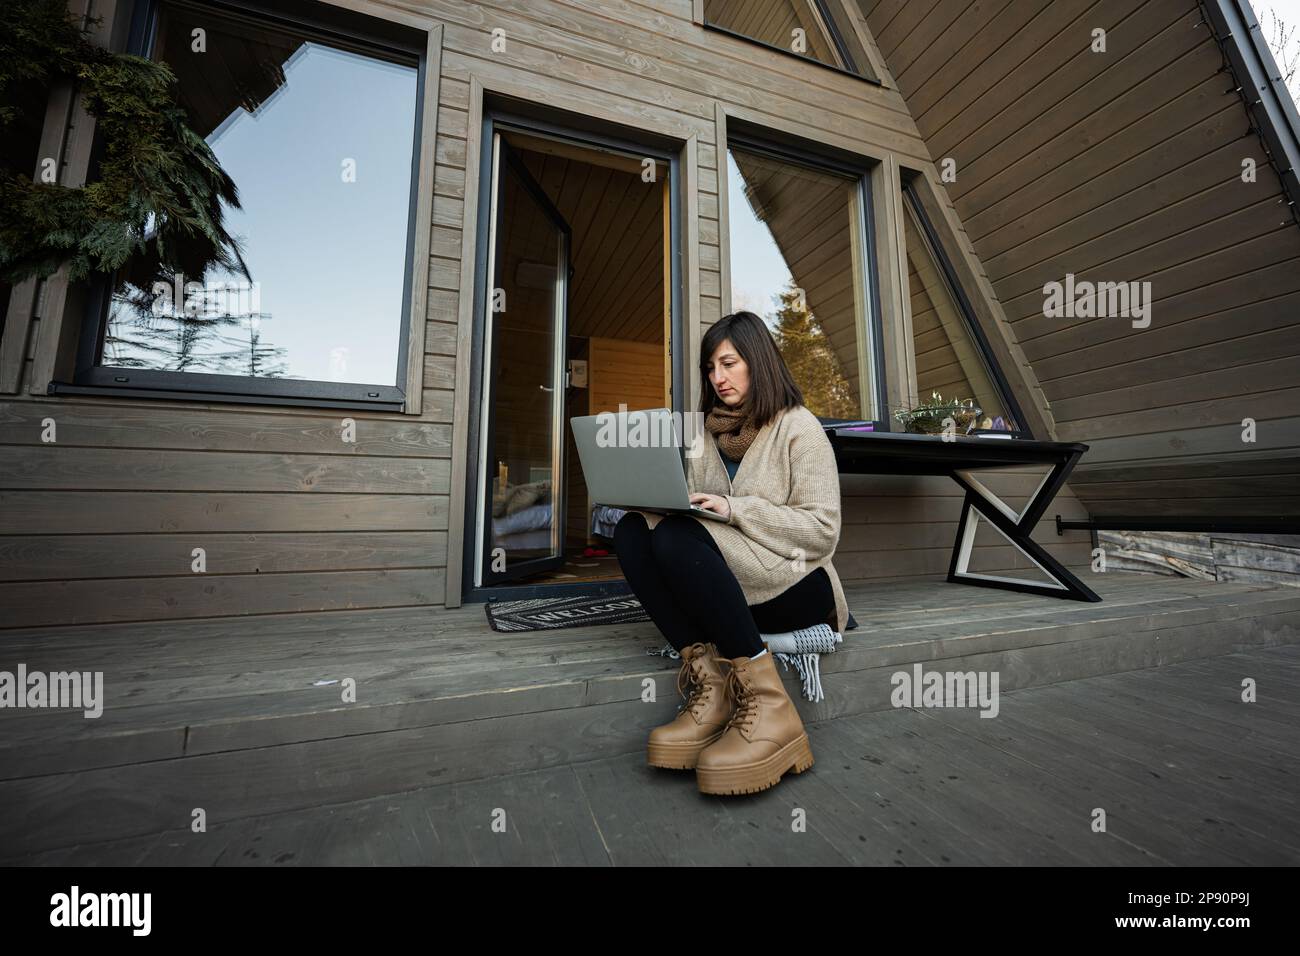 Remote work and escaping to nature concept. Woman works on laptop against tiny cabin house. Stock Photo